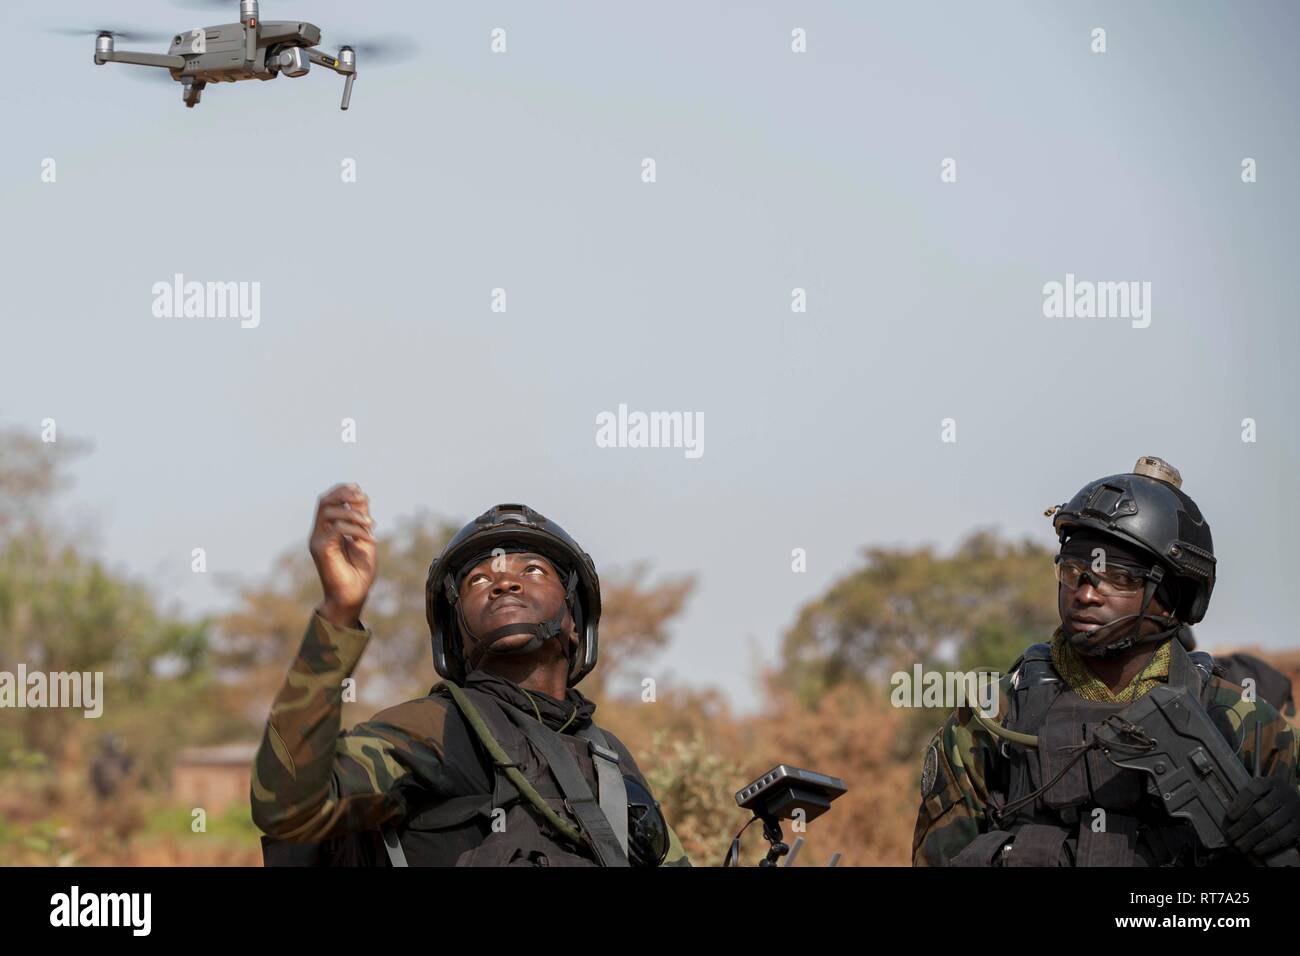 Small drone military stock photography Alamy